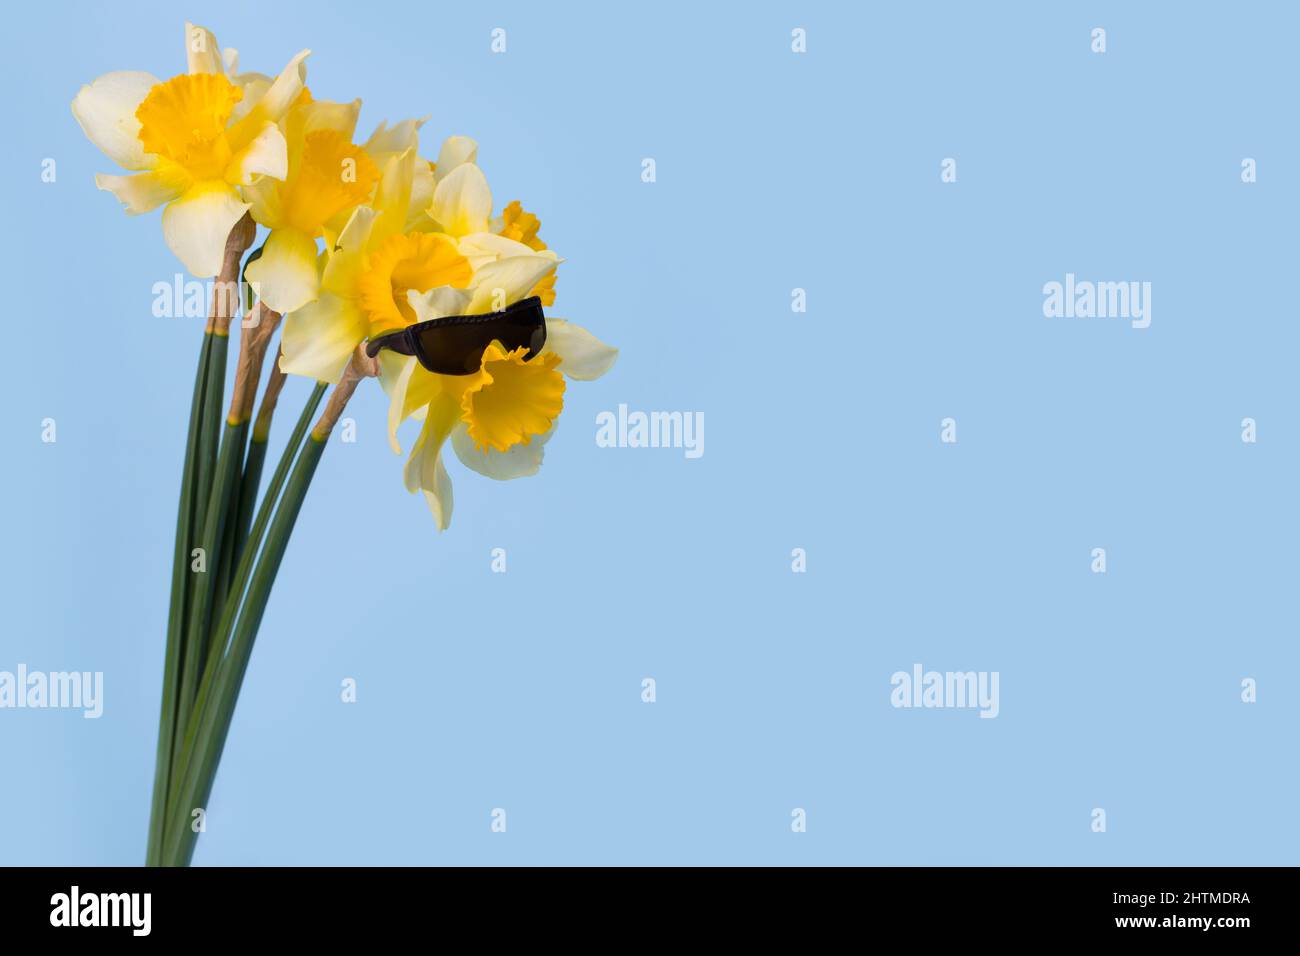 Funny idea with flower wearing sunglasses on a blue background. Minimal spring concept. Copy space. Stock Photo